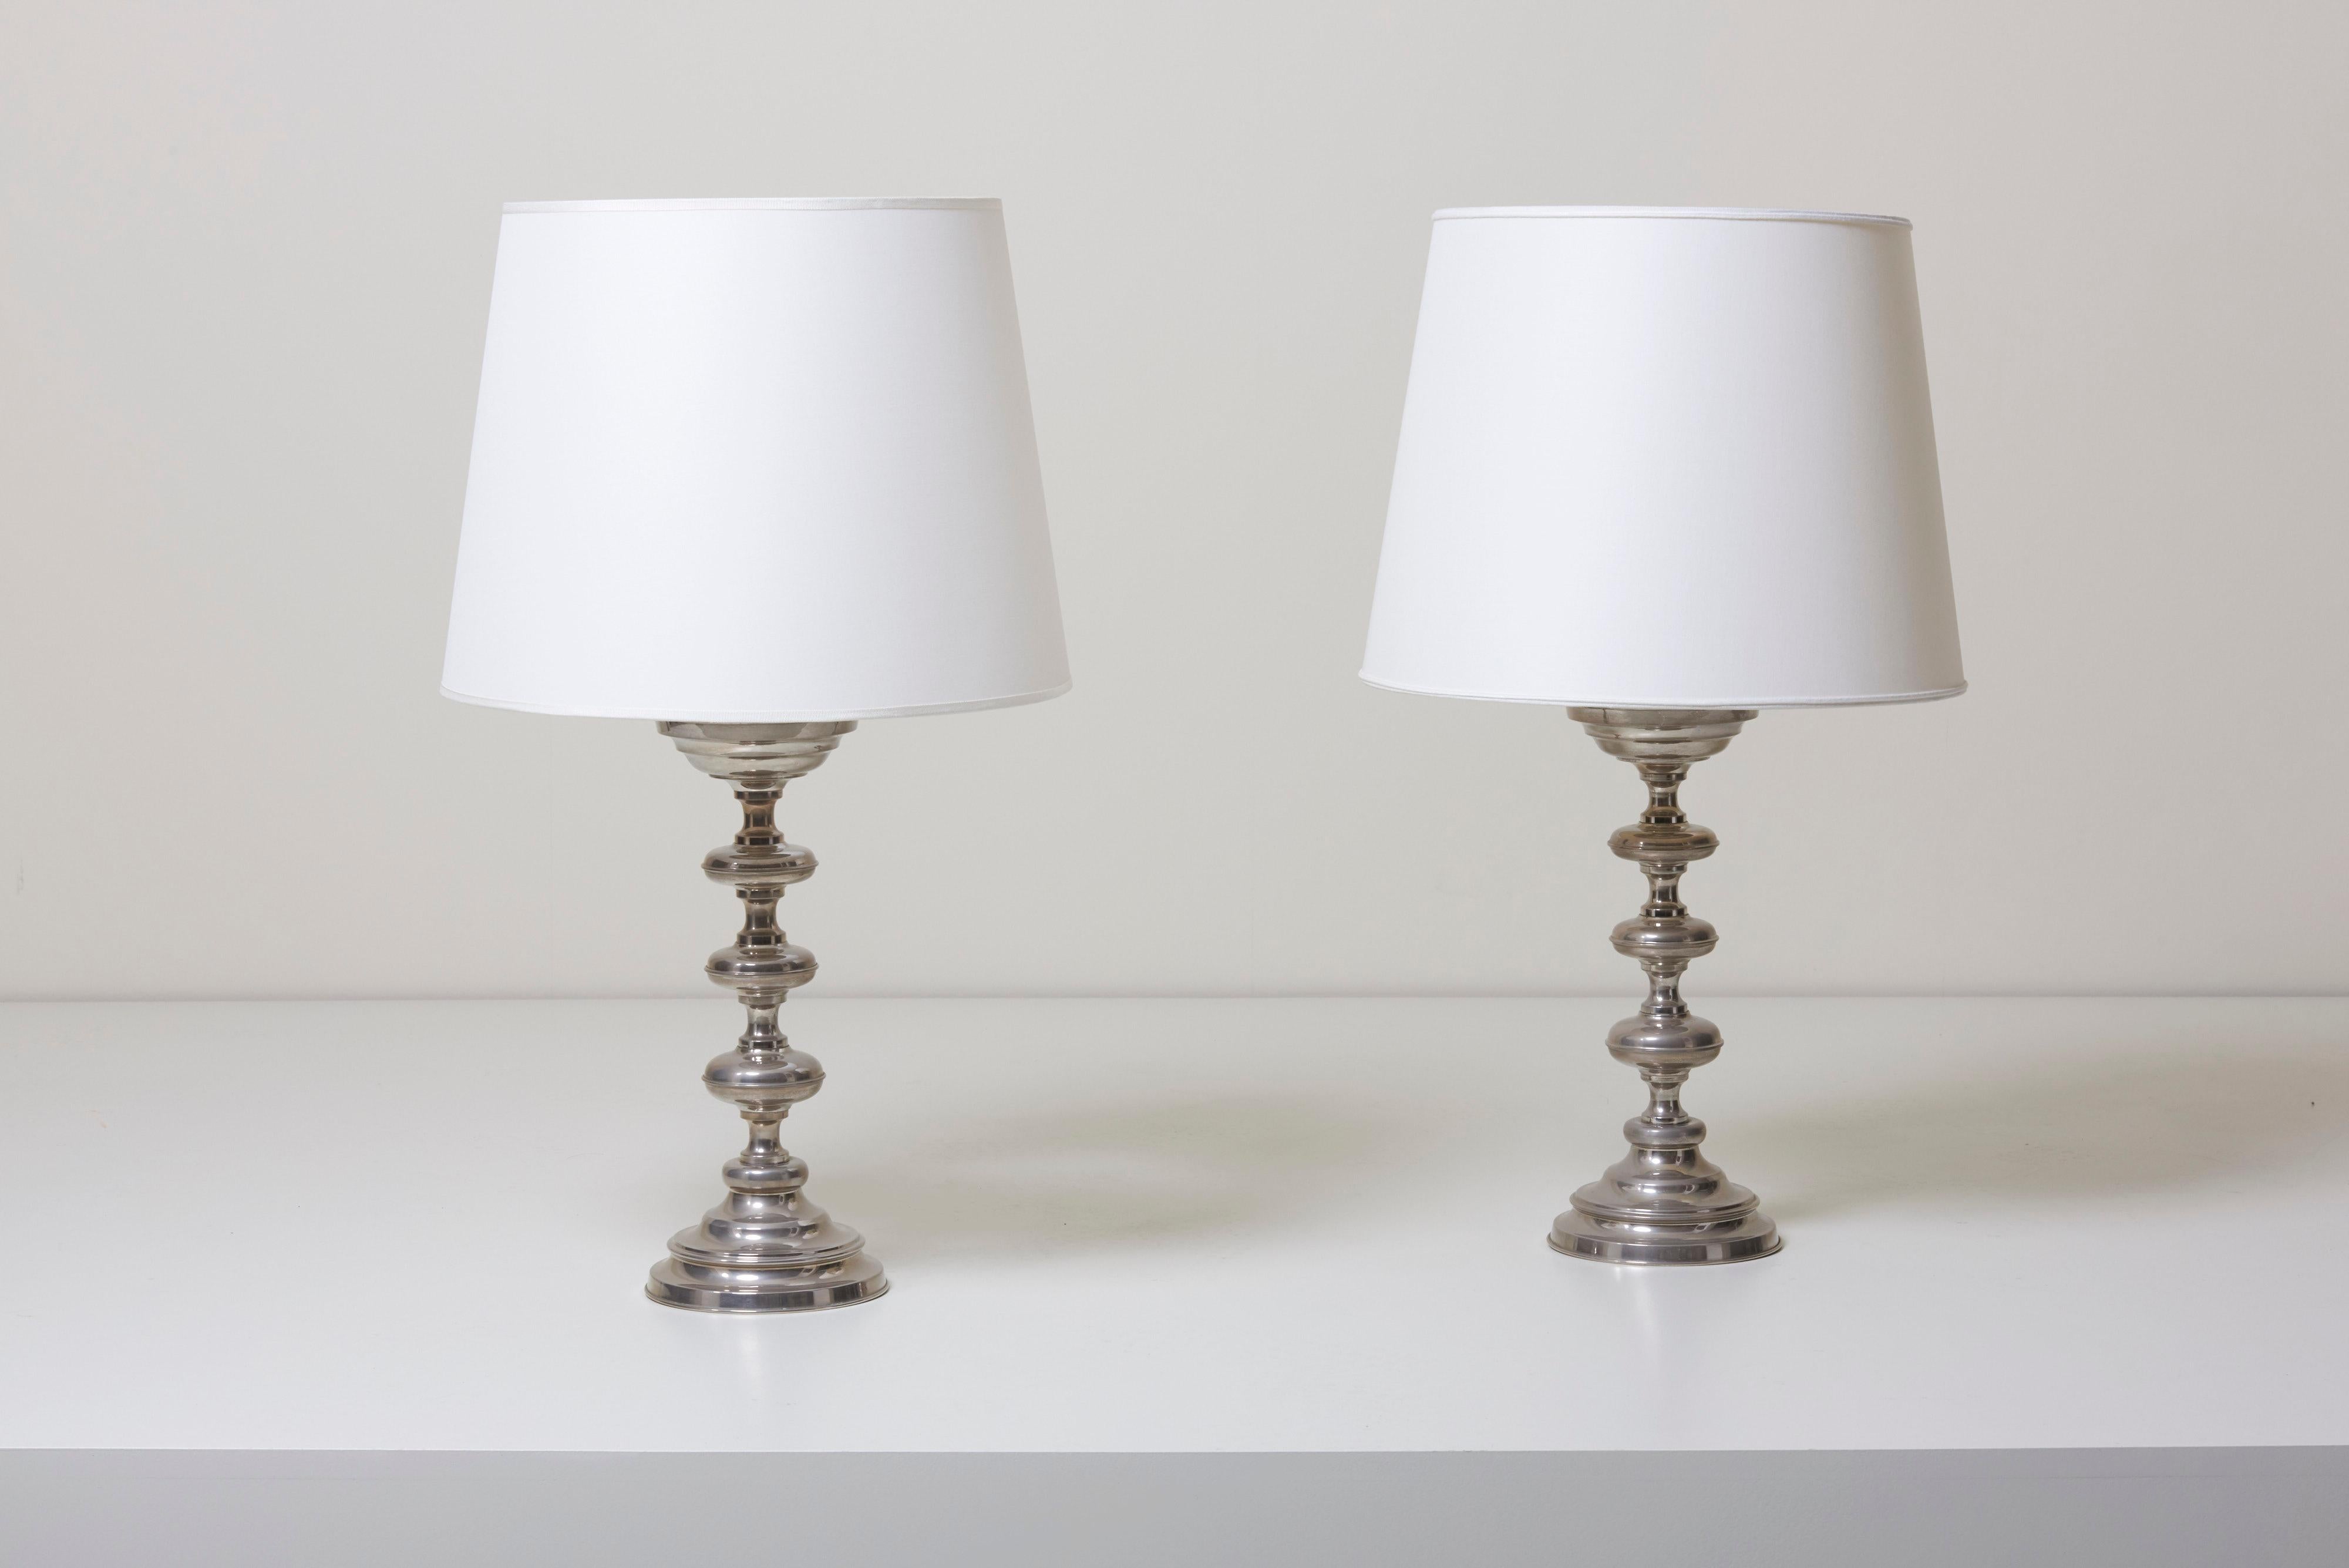 Excellent pair of 1970s nickelled Ingo Maurer table lamps in excellent condition. Signed!
The lamps will be sold without the shades. One model A / E27 bulb each.

